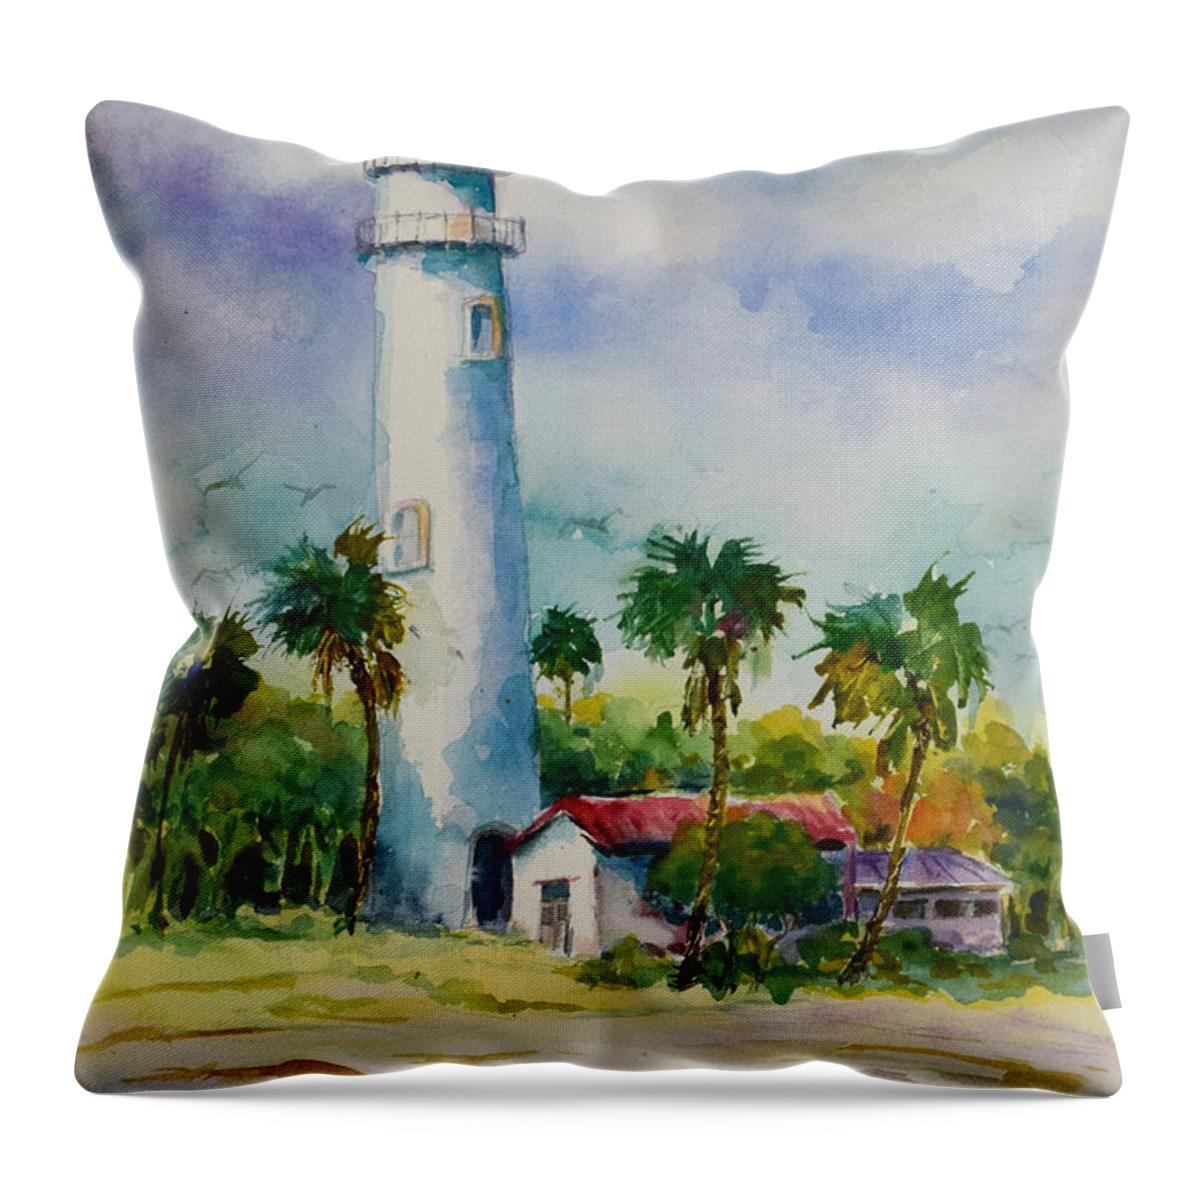  Throw Pillow featuring the painting Light House at the Beach by Jyotika Shroff